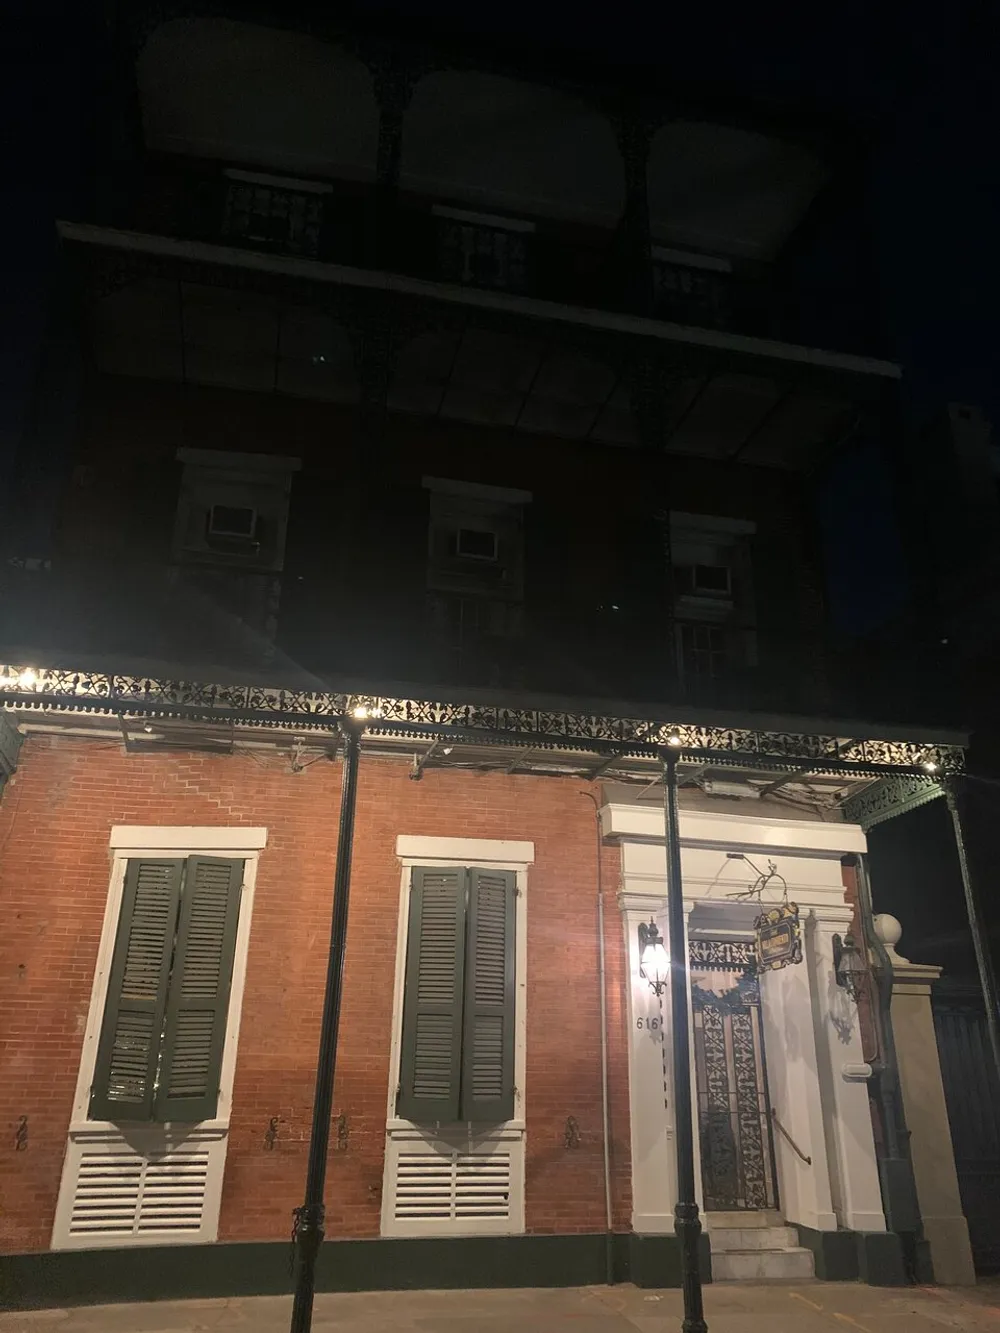 The image shows a nighttime view of a two-story red brick building with white shutters ornate wrought iron balcony details and a street lamp in the foreground